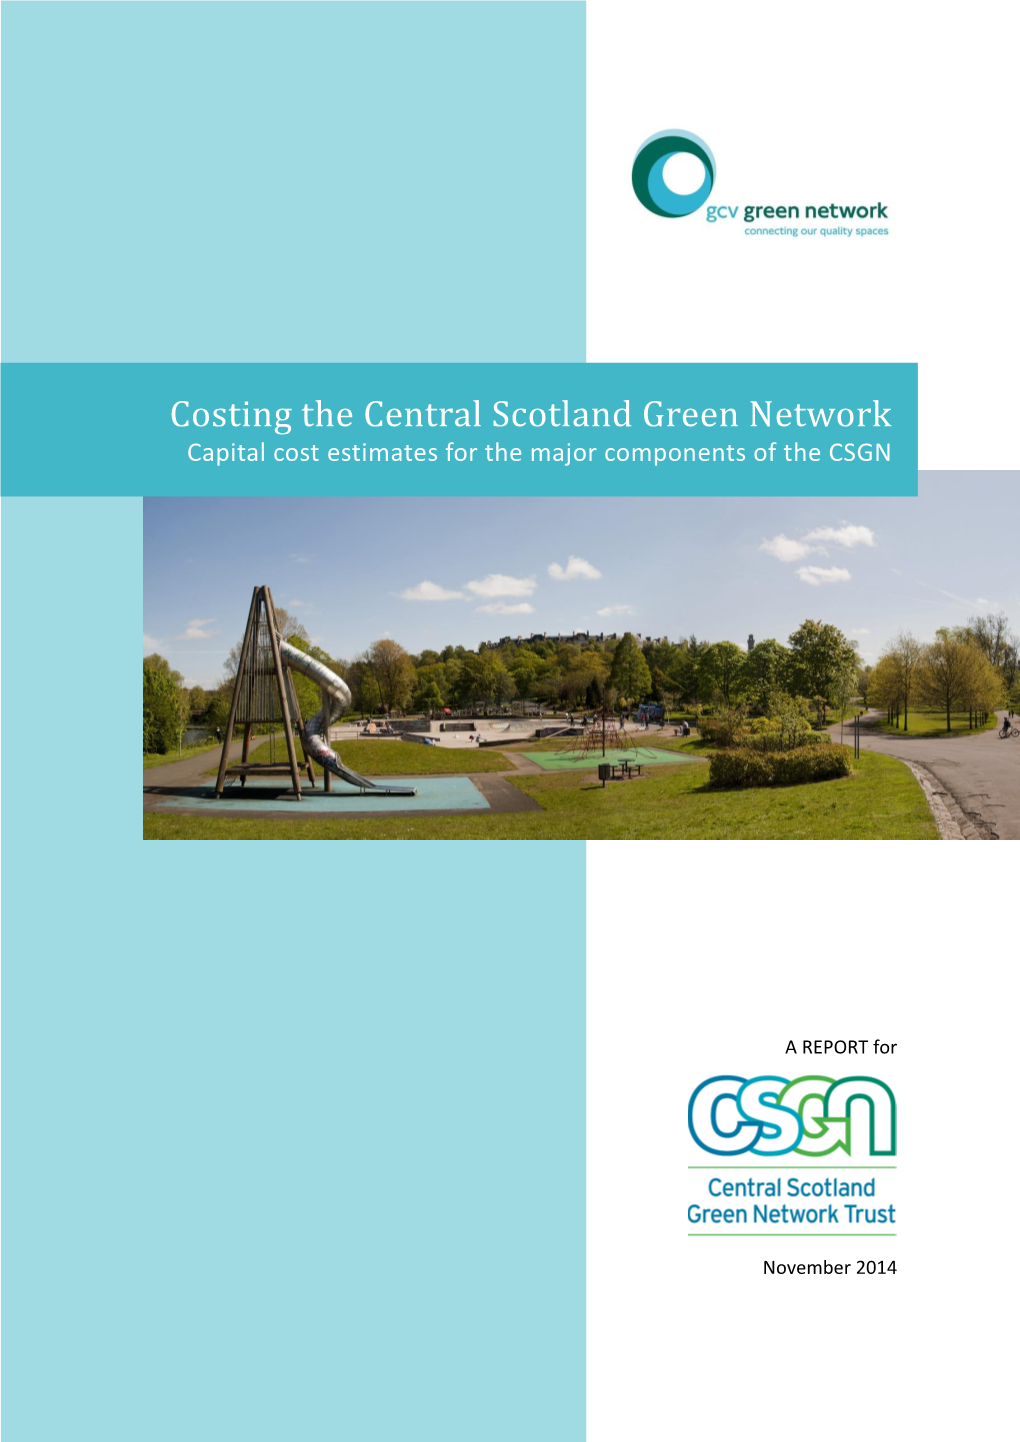 Costing the CSGN – Capital Cost Estimates for the Major Components of the CSGN’, the CSGN Trust and the GCV Green Network Partnership